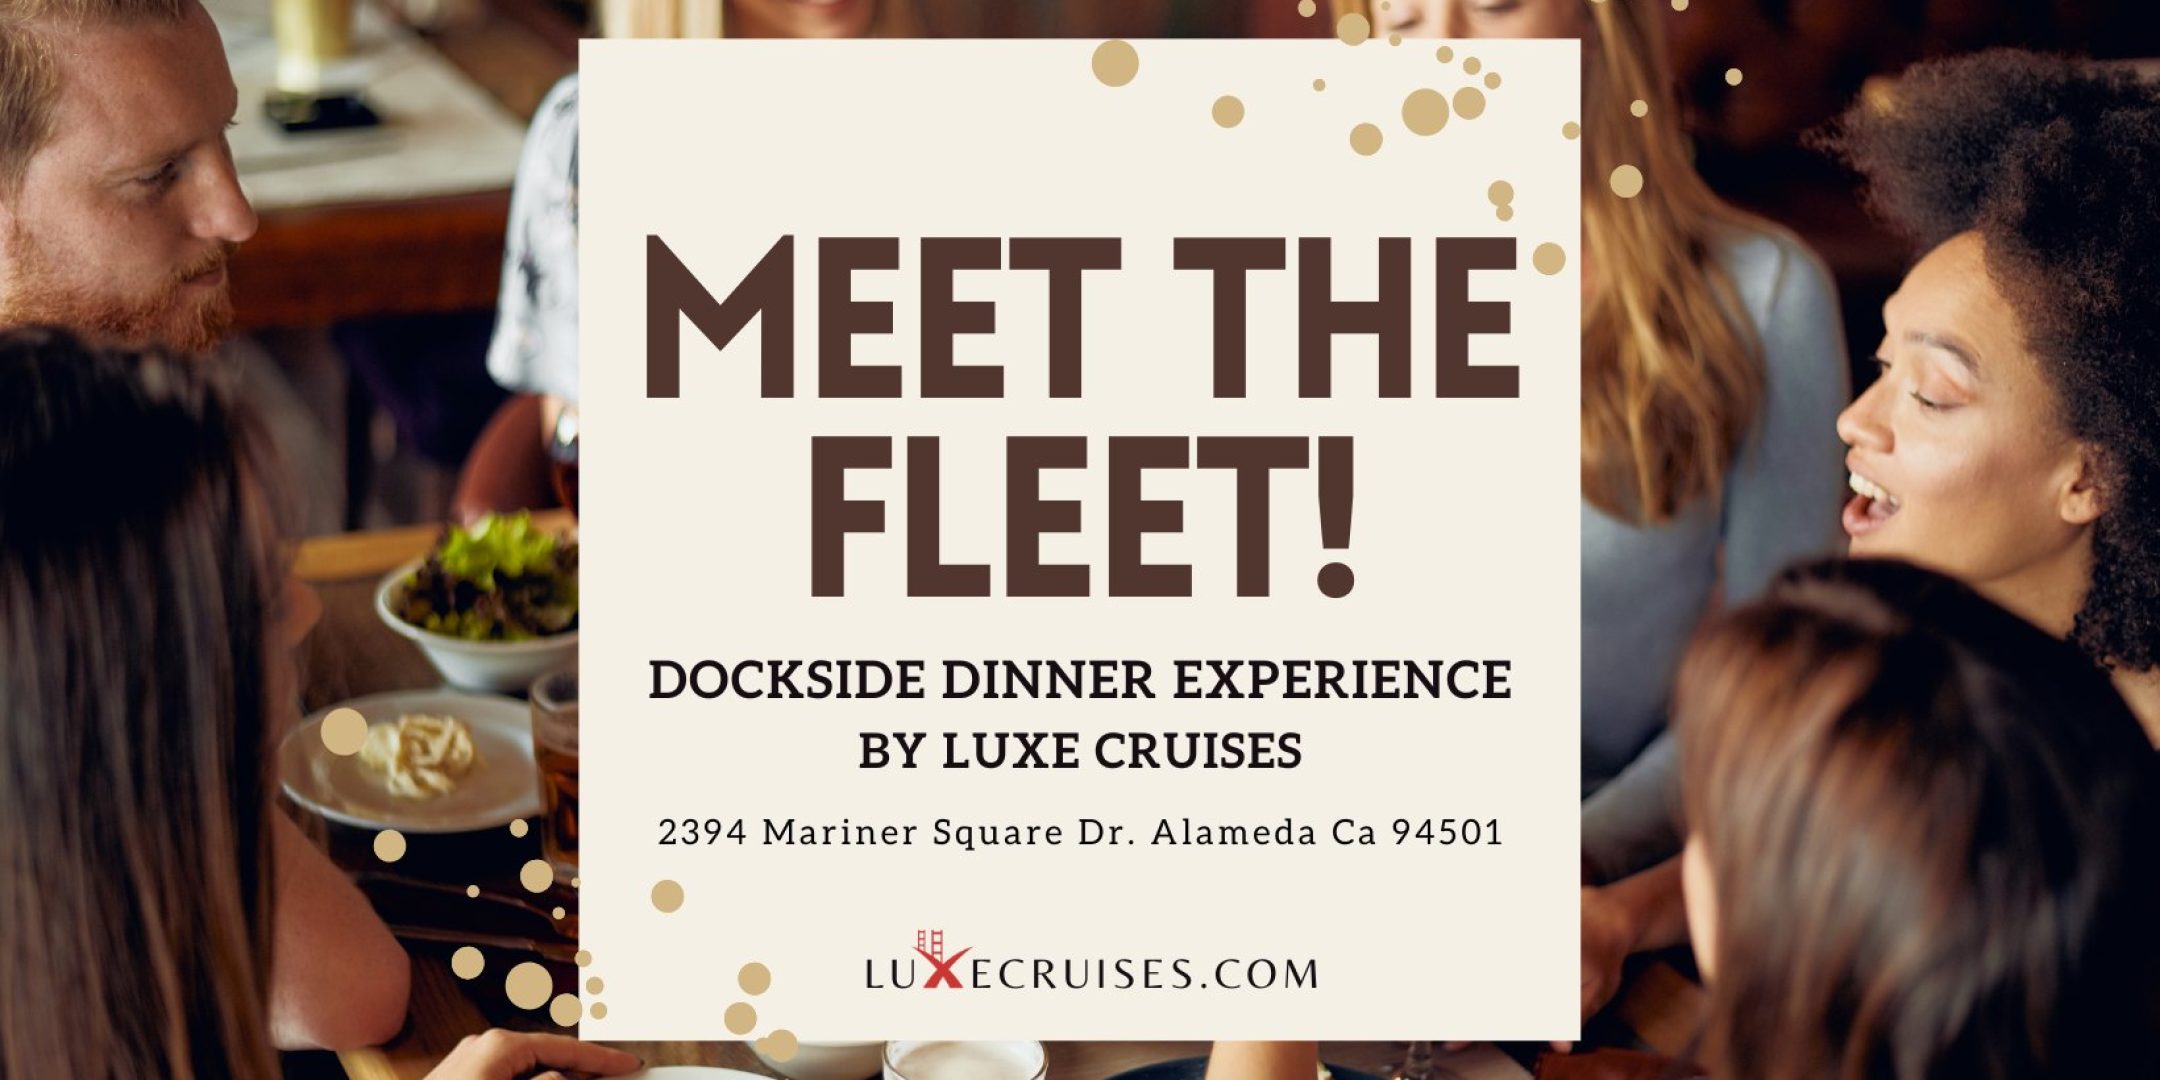 Get ready to relax and socialize while enjoying delicious buffet dinner by LUXE Cruises and Events